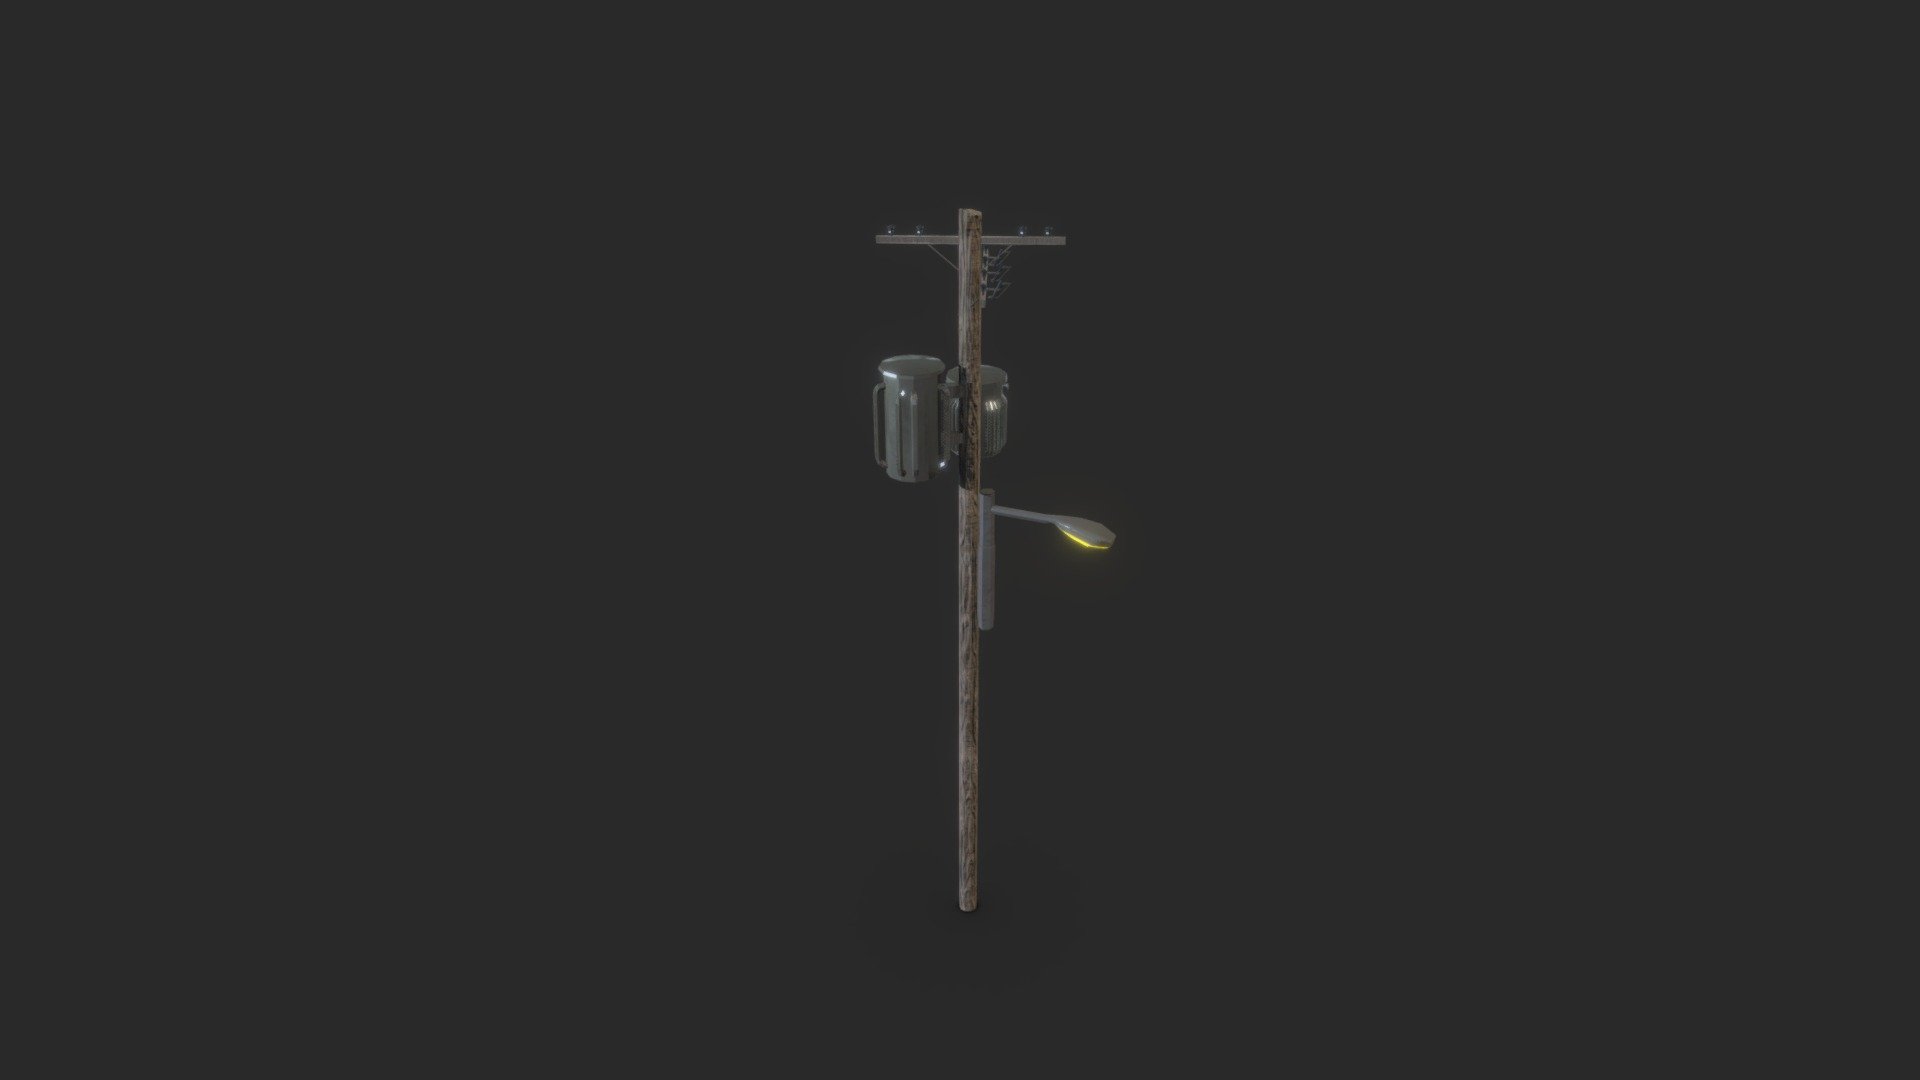 Publish my first 3D model

A portion of assets from the street Environment 

Textures come in 4k resolution and include Albedo, Normal and Metalness, Roughness, (baked into a single uvmap).

Criticize this work with your comments to make me better :) - Electric Pole - Download Free 3D model by MostafaRadmard 3d model